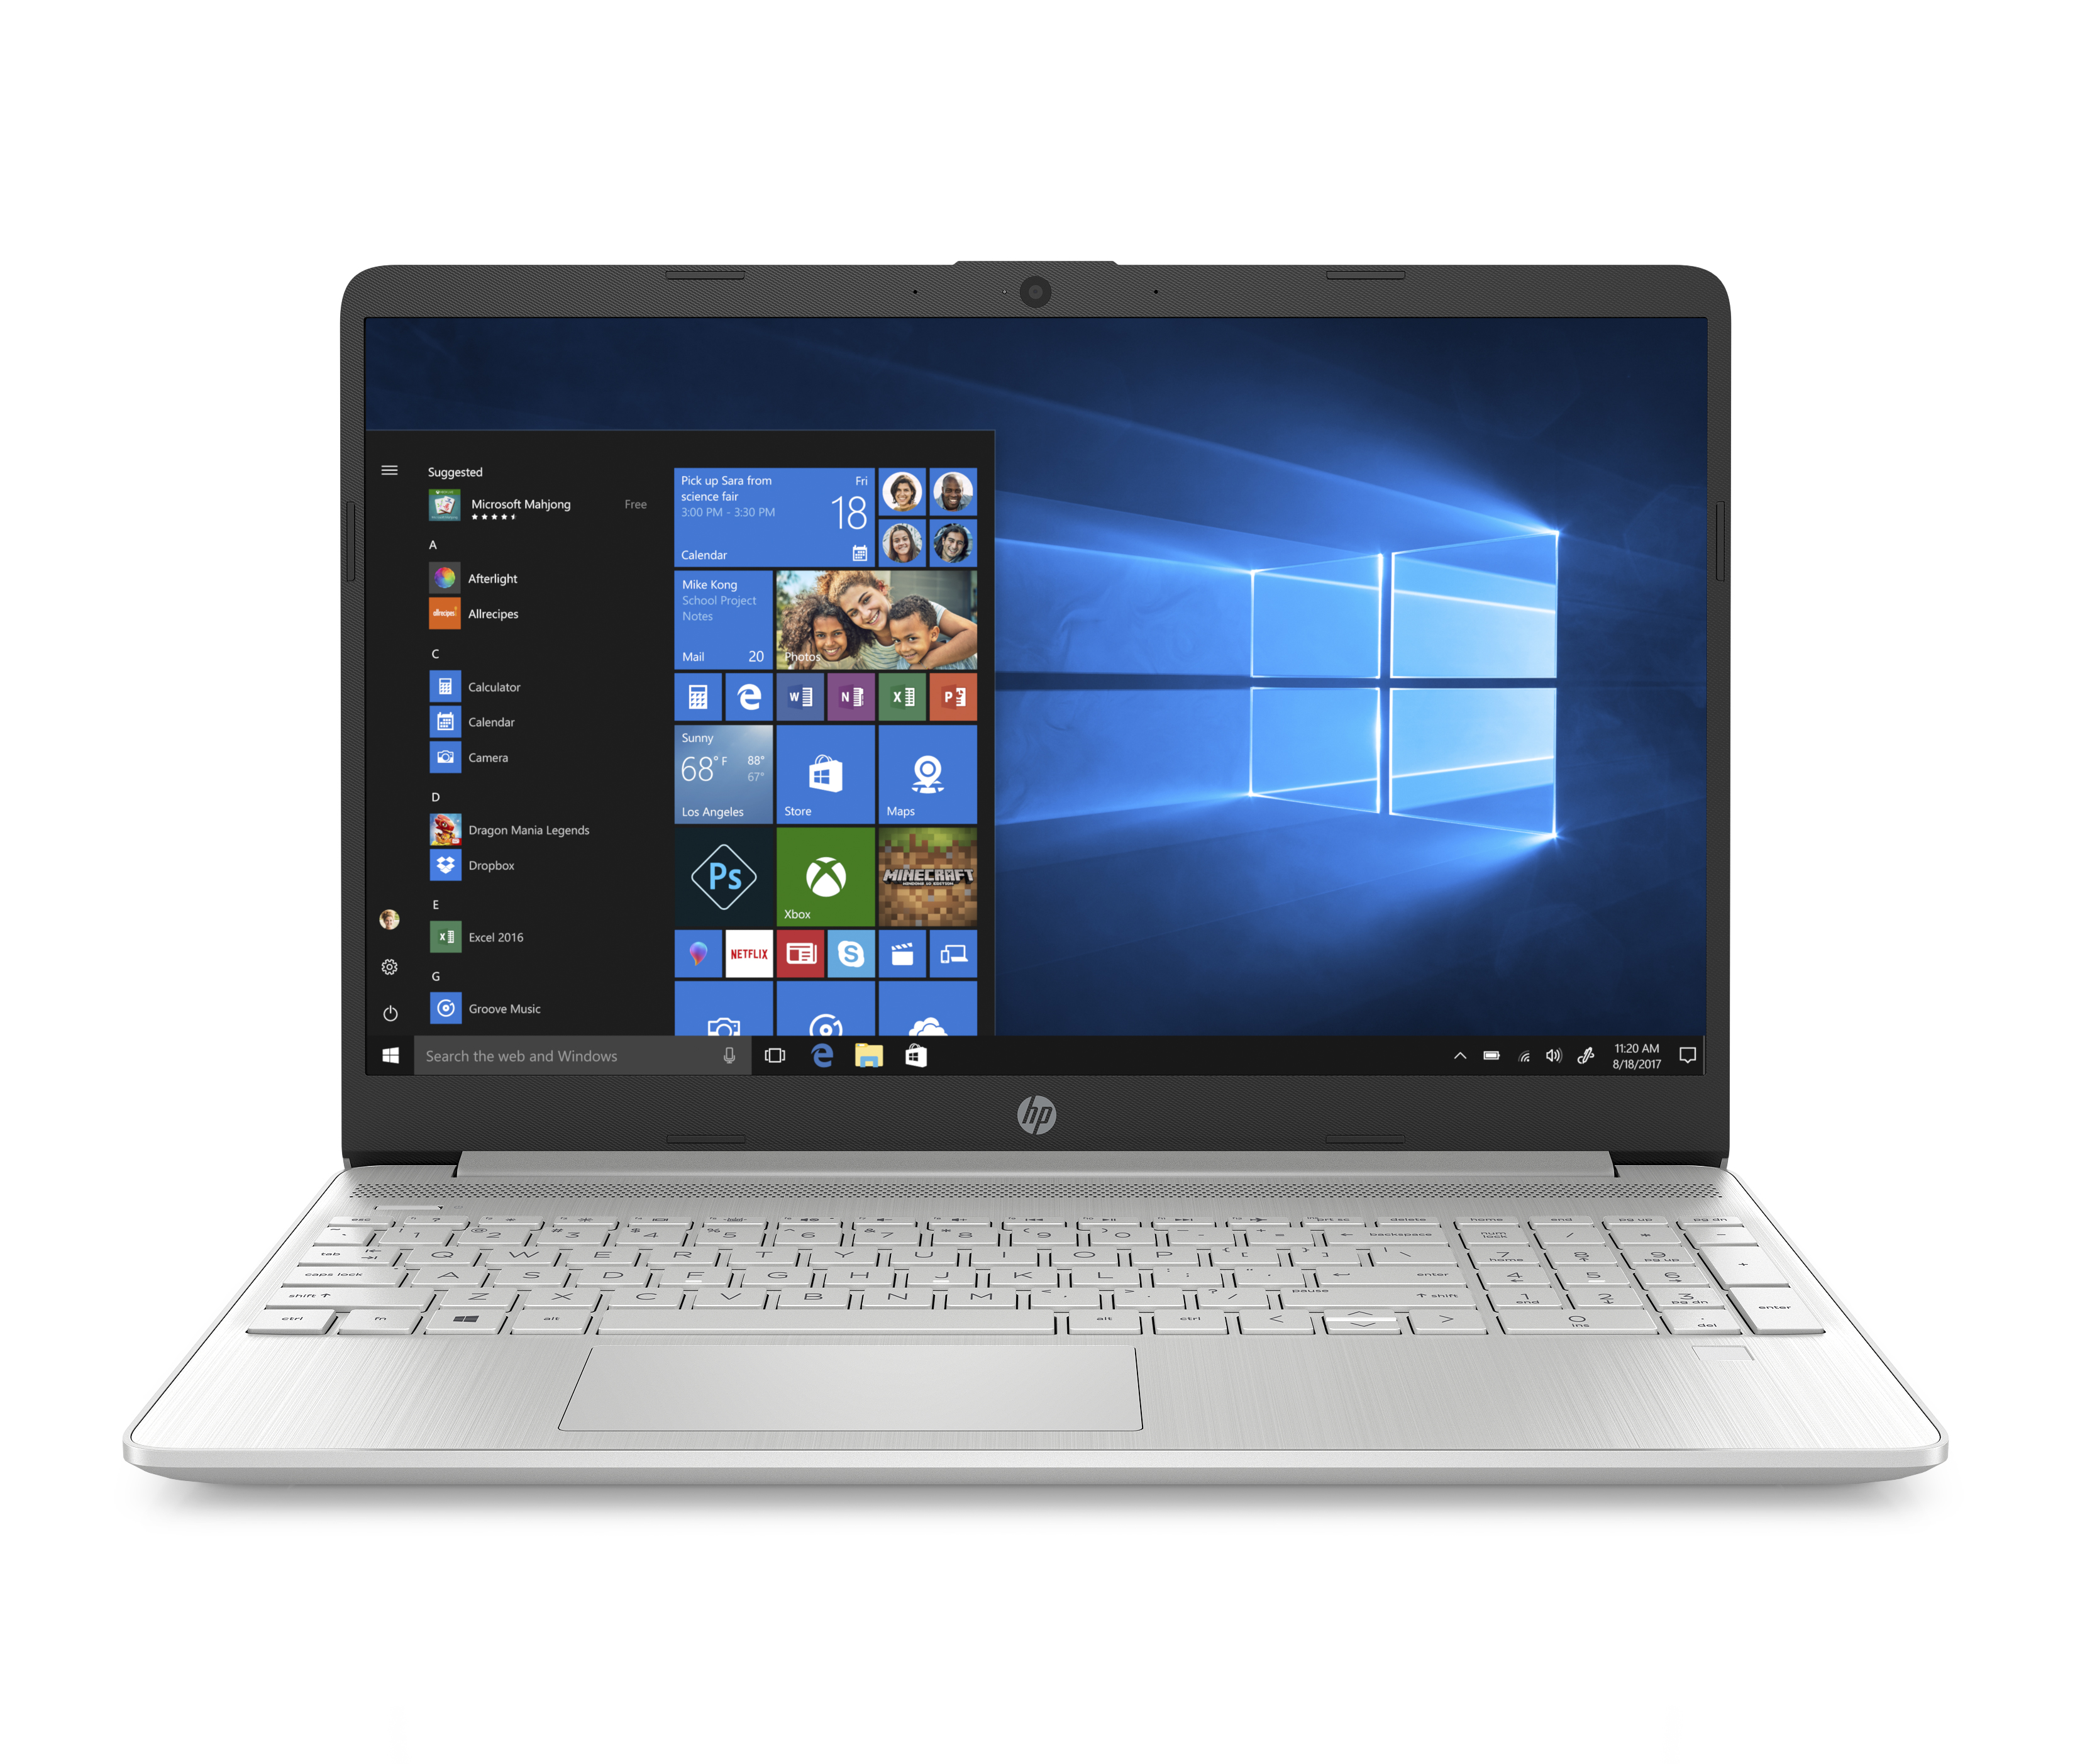 HP 15.6" i3 Touch 8GB/256GB Laptop-Silver - image 1 of 10